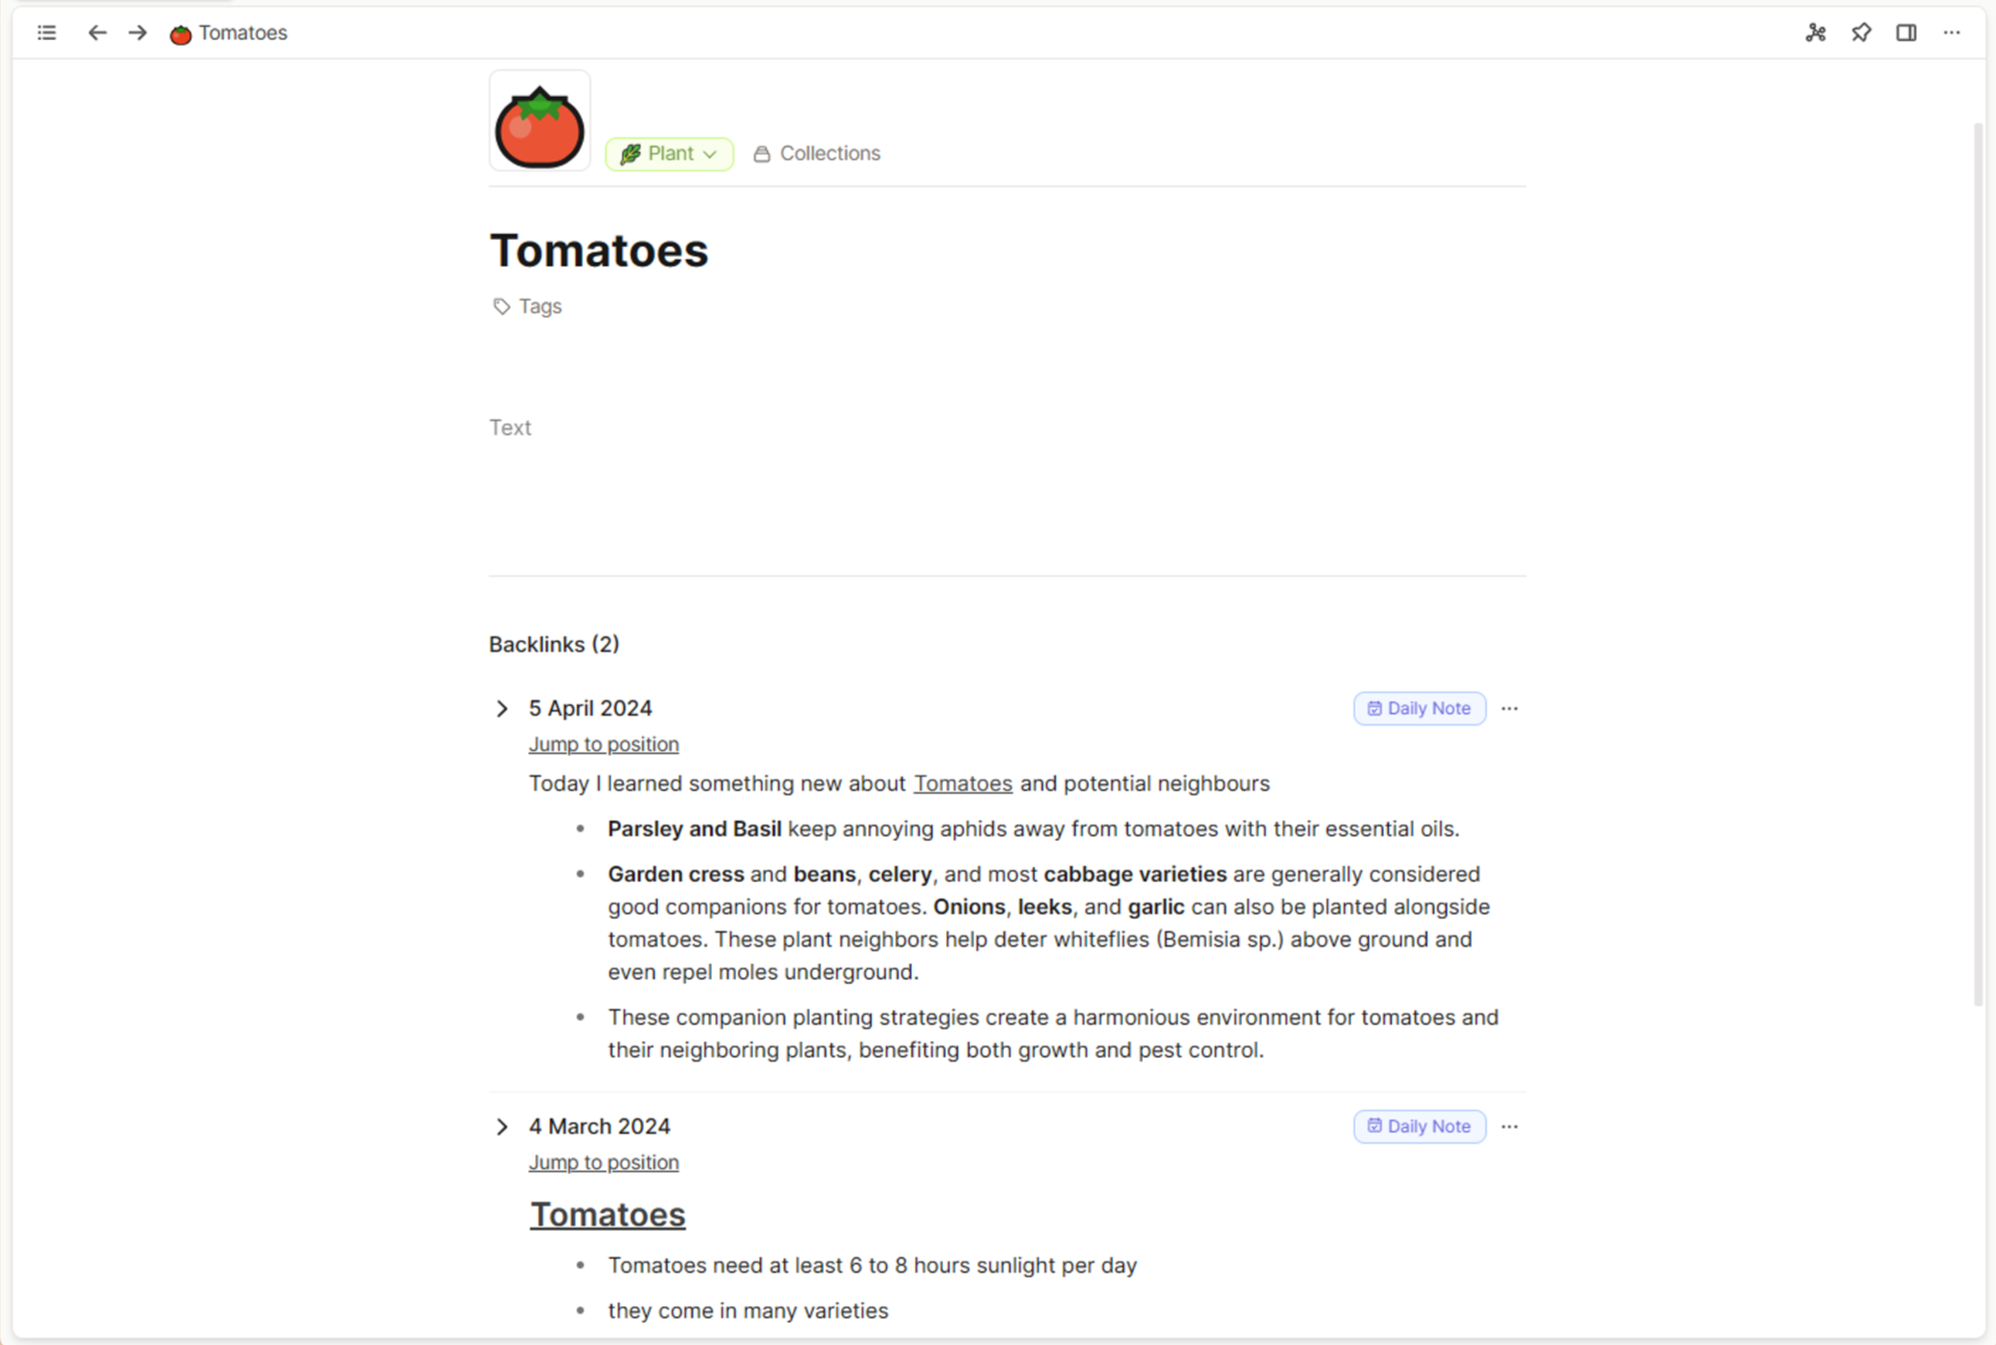 Tomatoes with more links